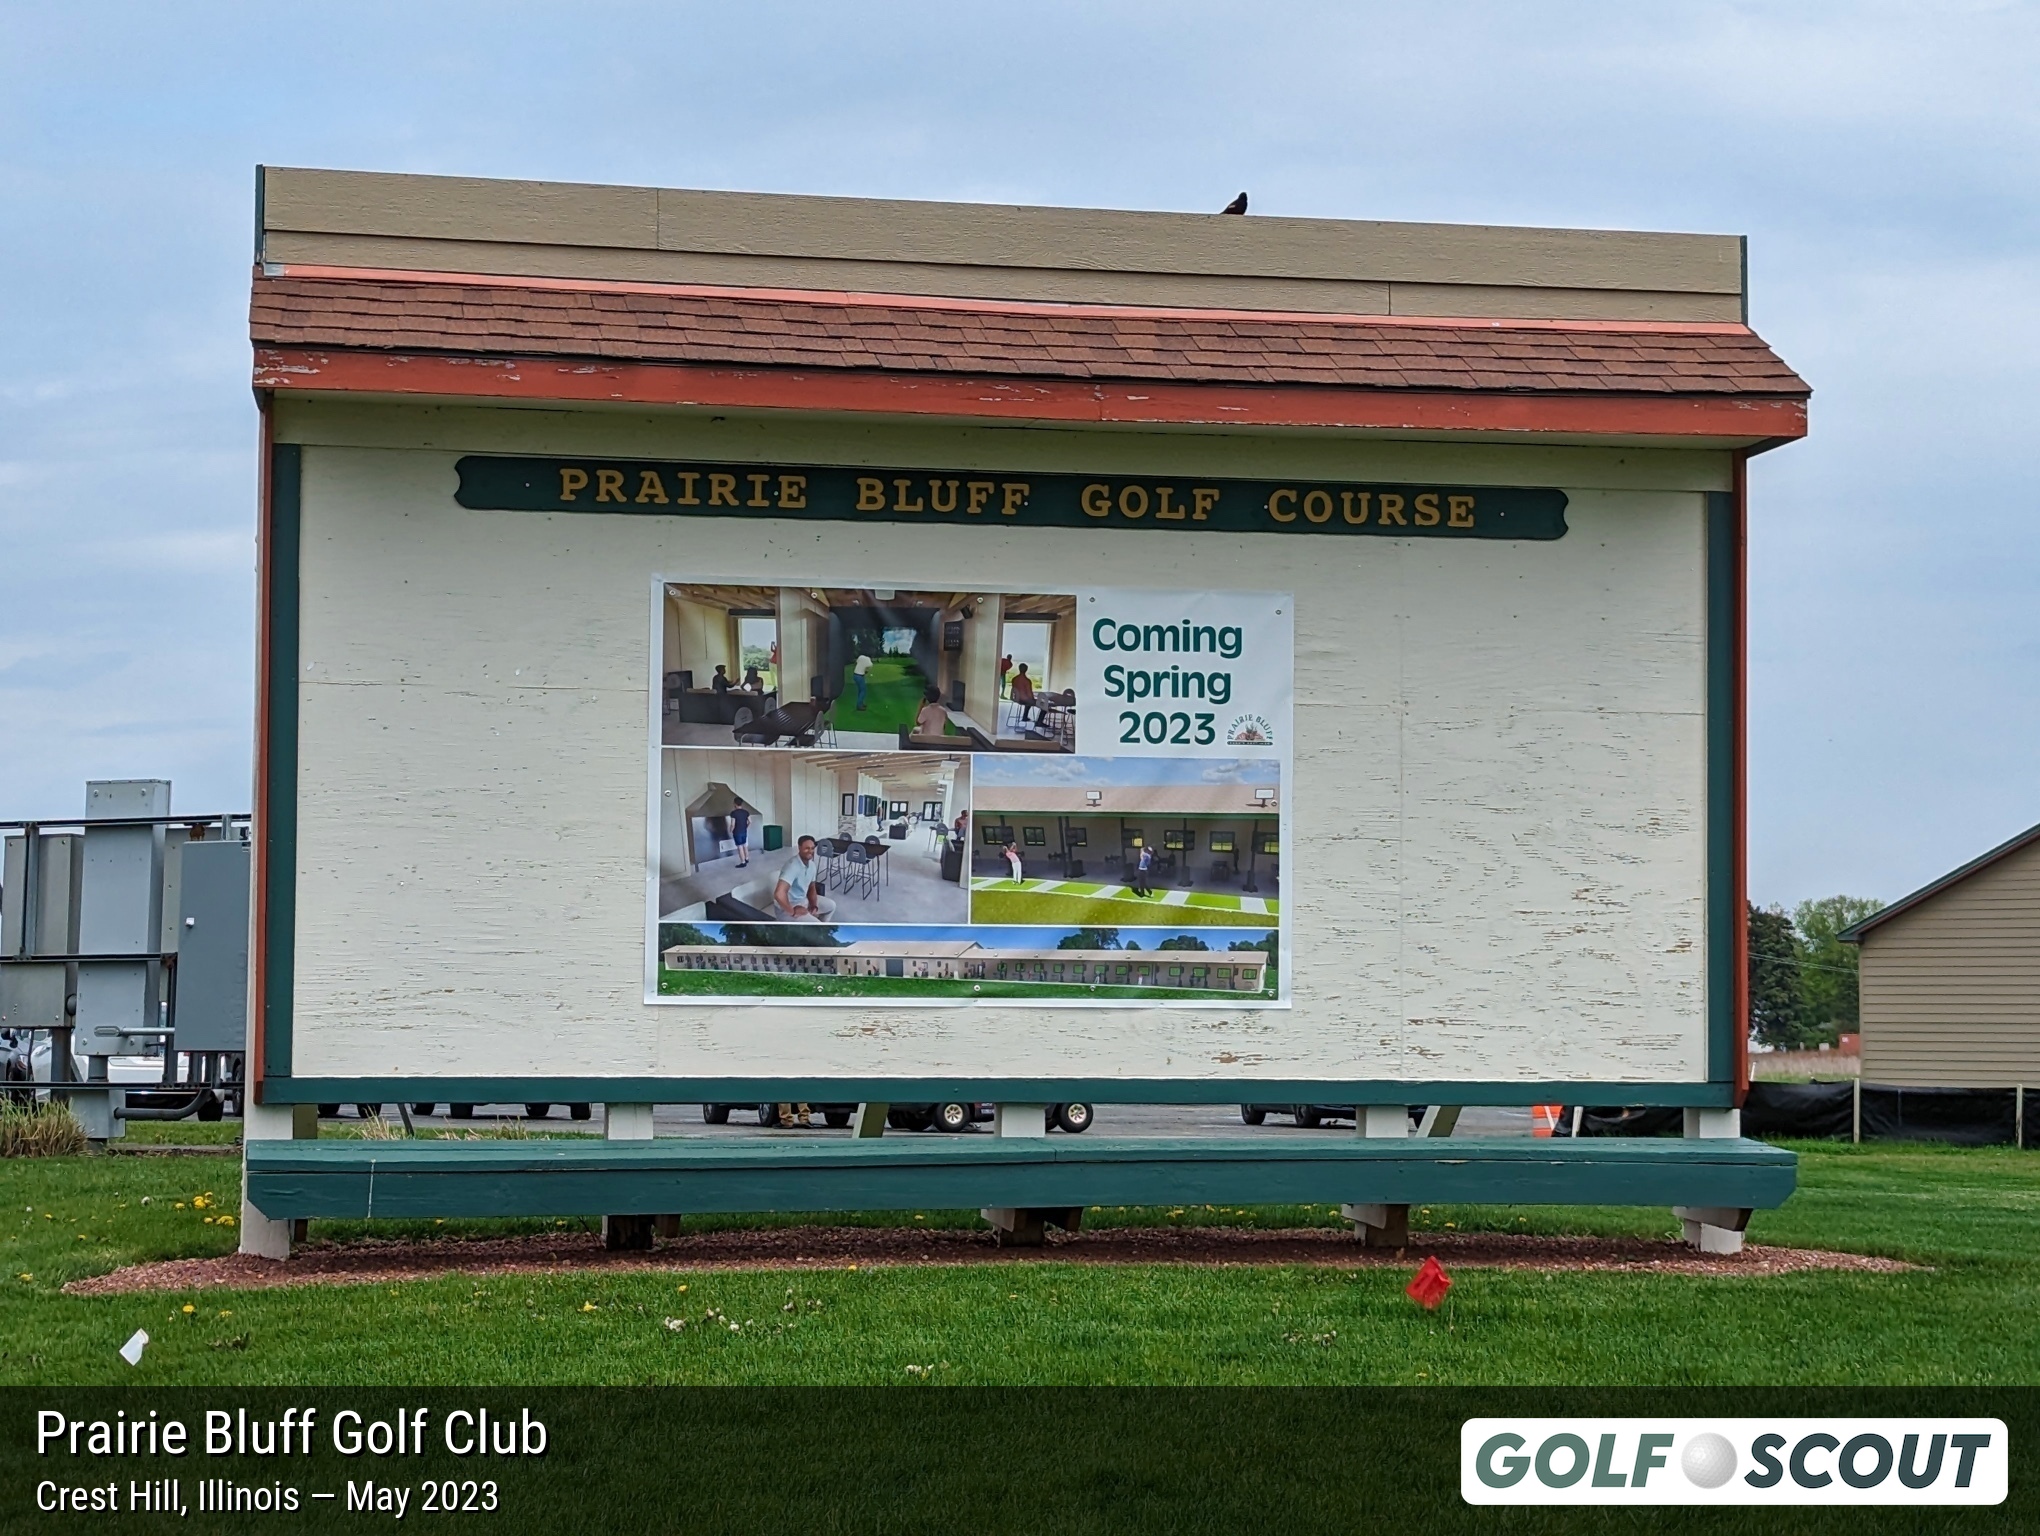 Miscellaneous photo of Prairie Bluff Golf Club in Crest Hill, Illinois. The driving range was under construction, but slated to be open in June 2023, with Trackman tech.